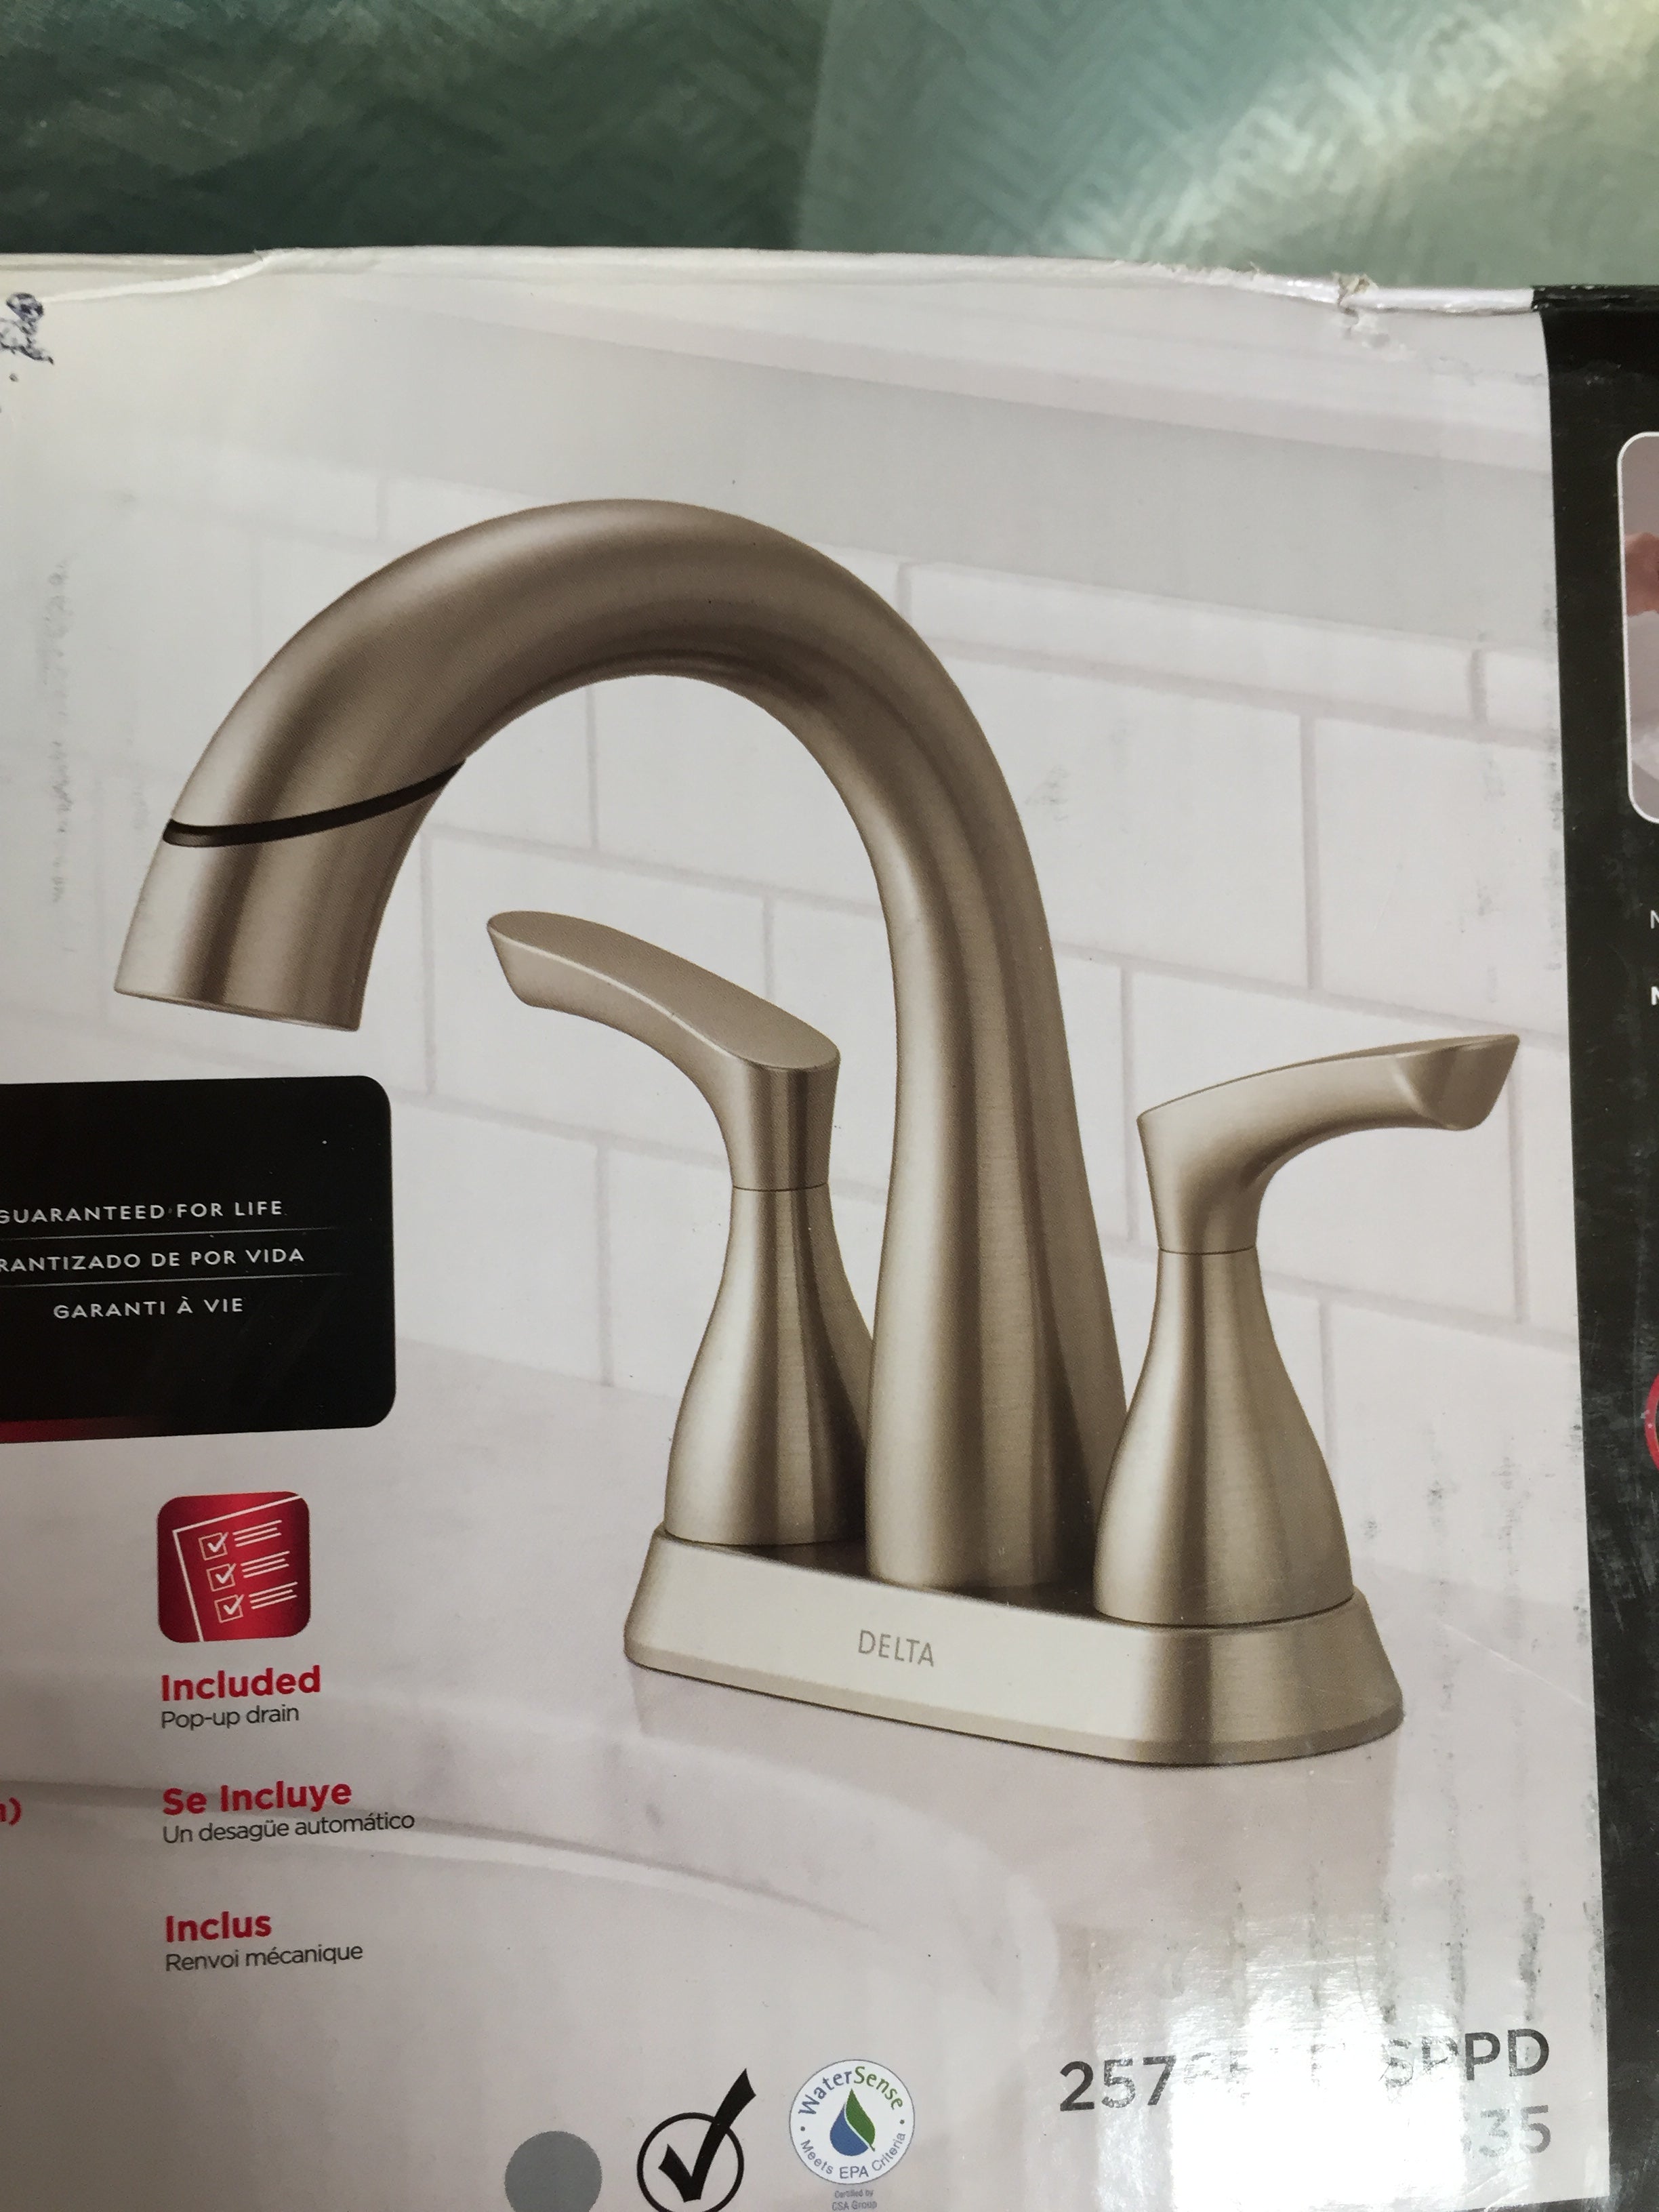 Delta Broadmoor 4in Centerset Pull-Down Spout Bathroom Faucet Brushed Nickel (7649851703534)